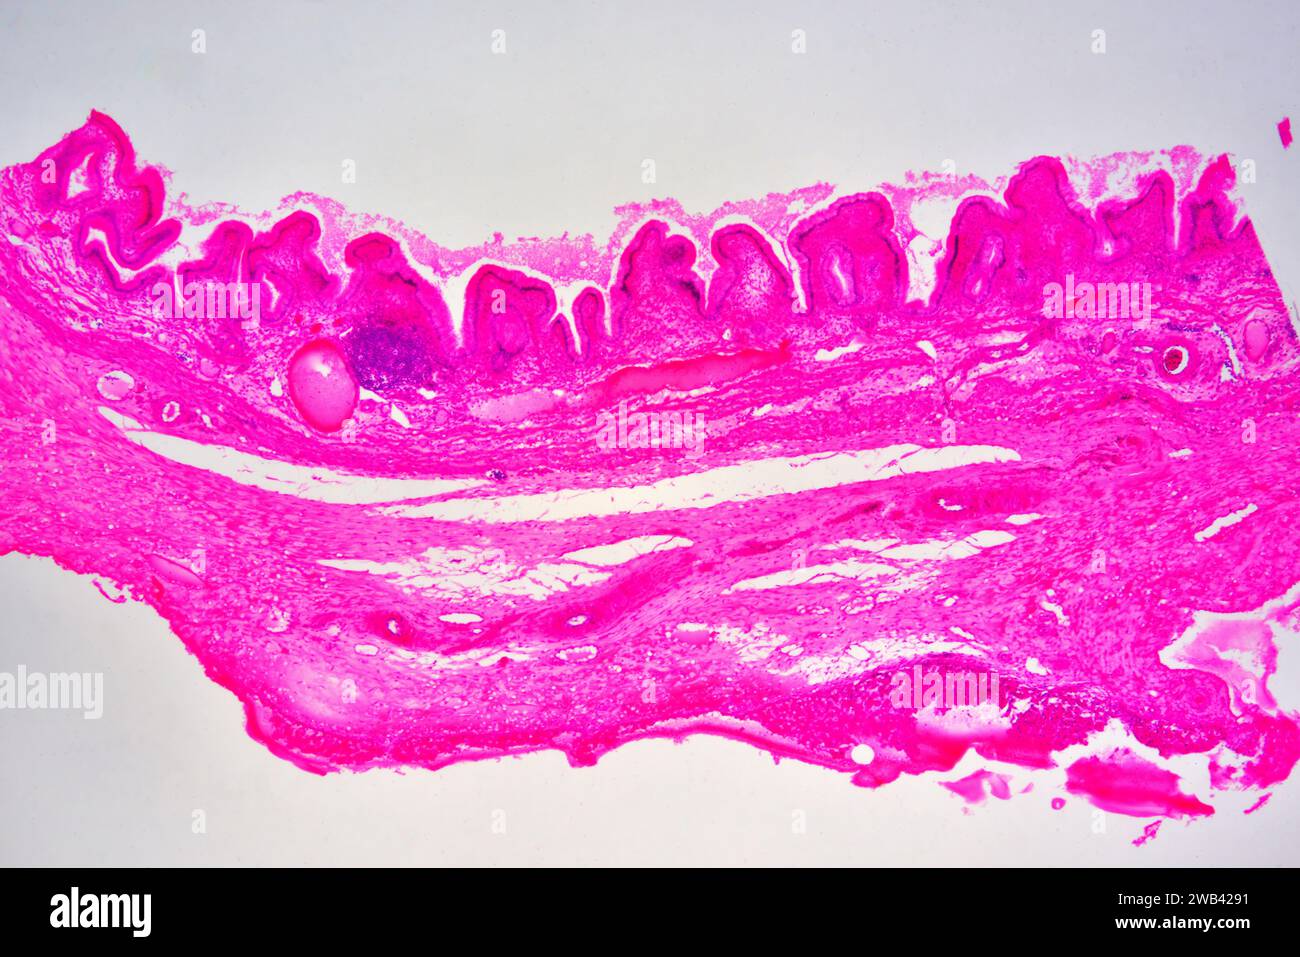 Gallbladder wall showing columnar epithelium with mucosal folds, connective tissue and smooth muscle fibers. Photomicrograph X30 at 10cm wide. Stock Photo